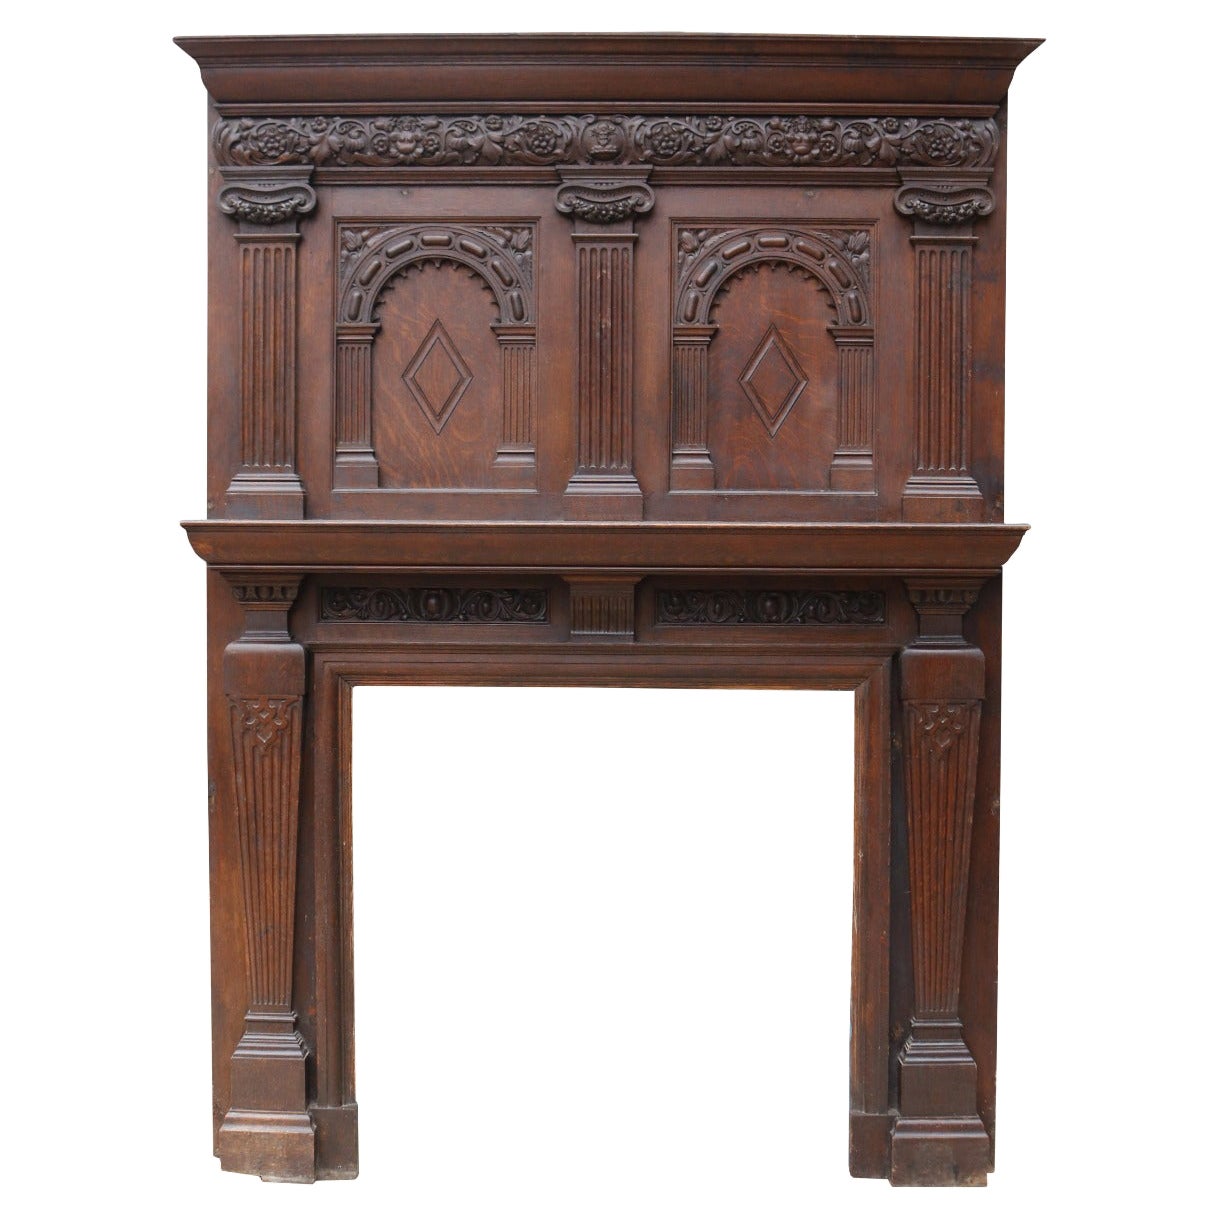 Jacobean Fireplaces and Mantels